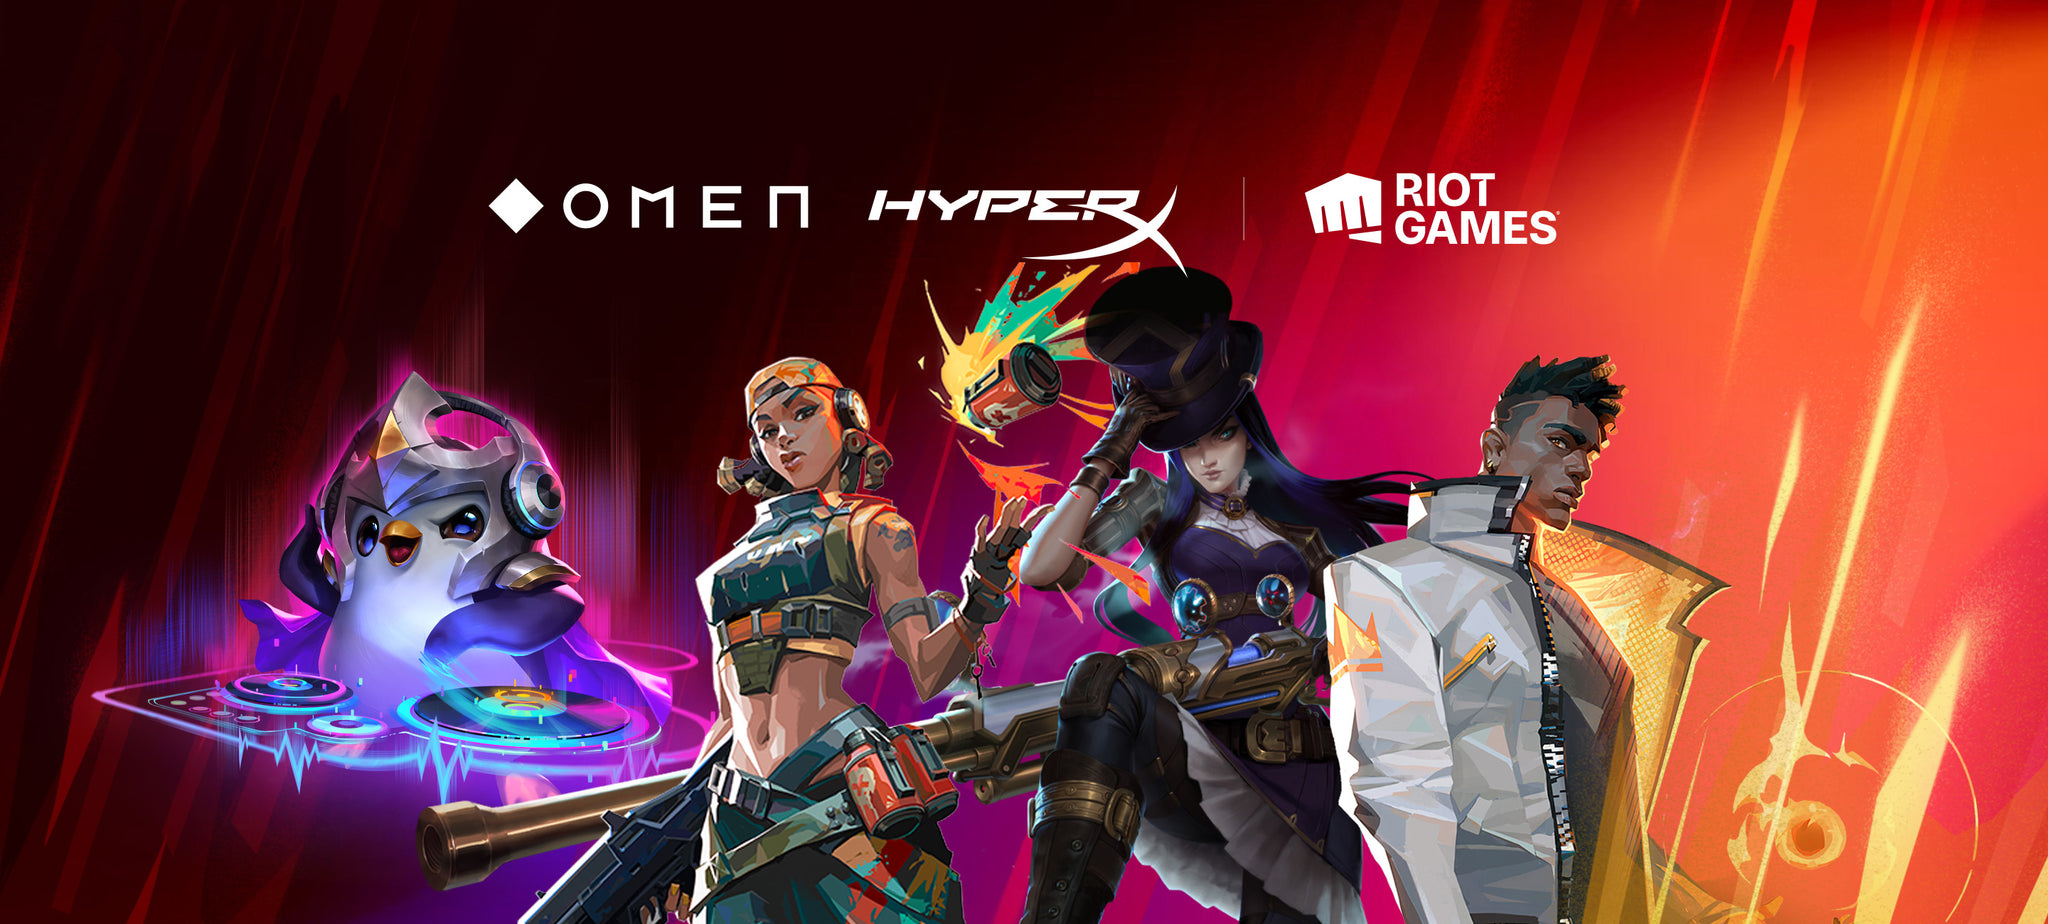 Pengu Knight, Raze, Caitlyn & Phoenix on a detailed background with the Riot Games, OMEN & HyperX Logos